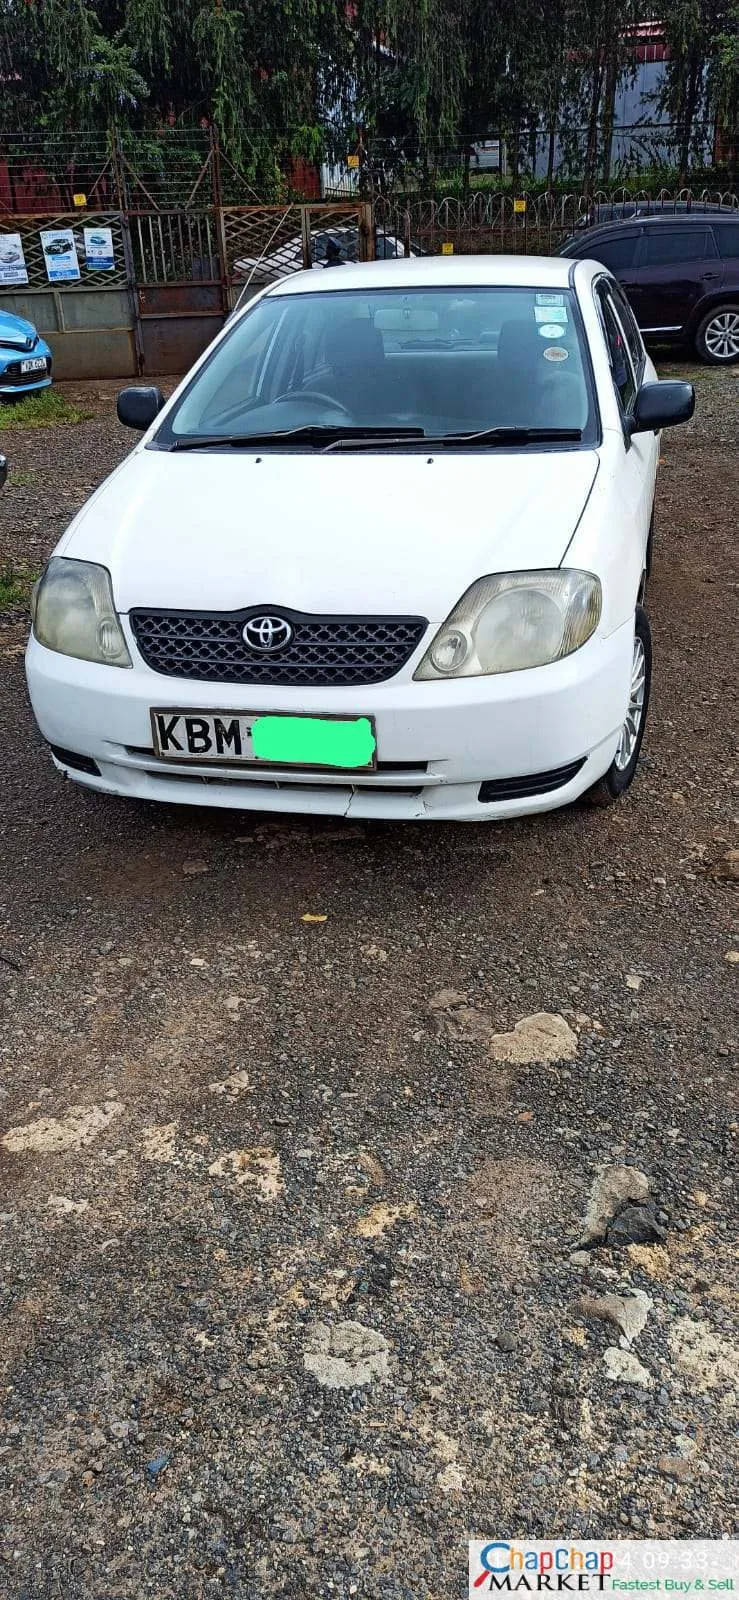 Toyota Corolla NZE QUICKEST SALE You Pay 30% Deposit Trade in OK Wow Hire purchase installments Kenya